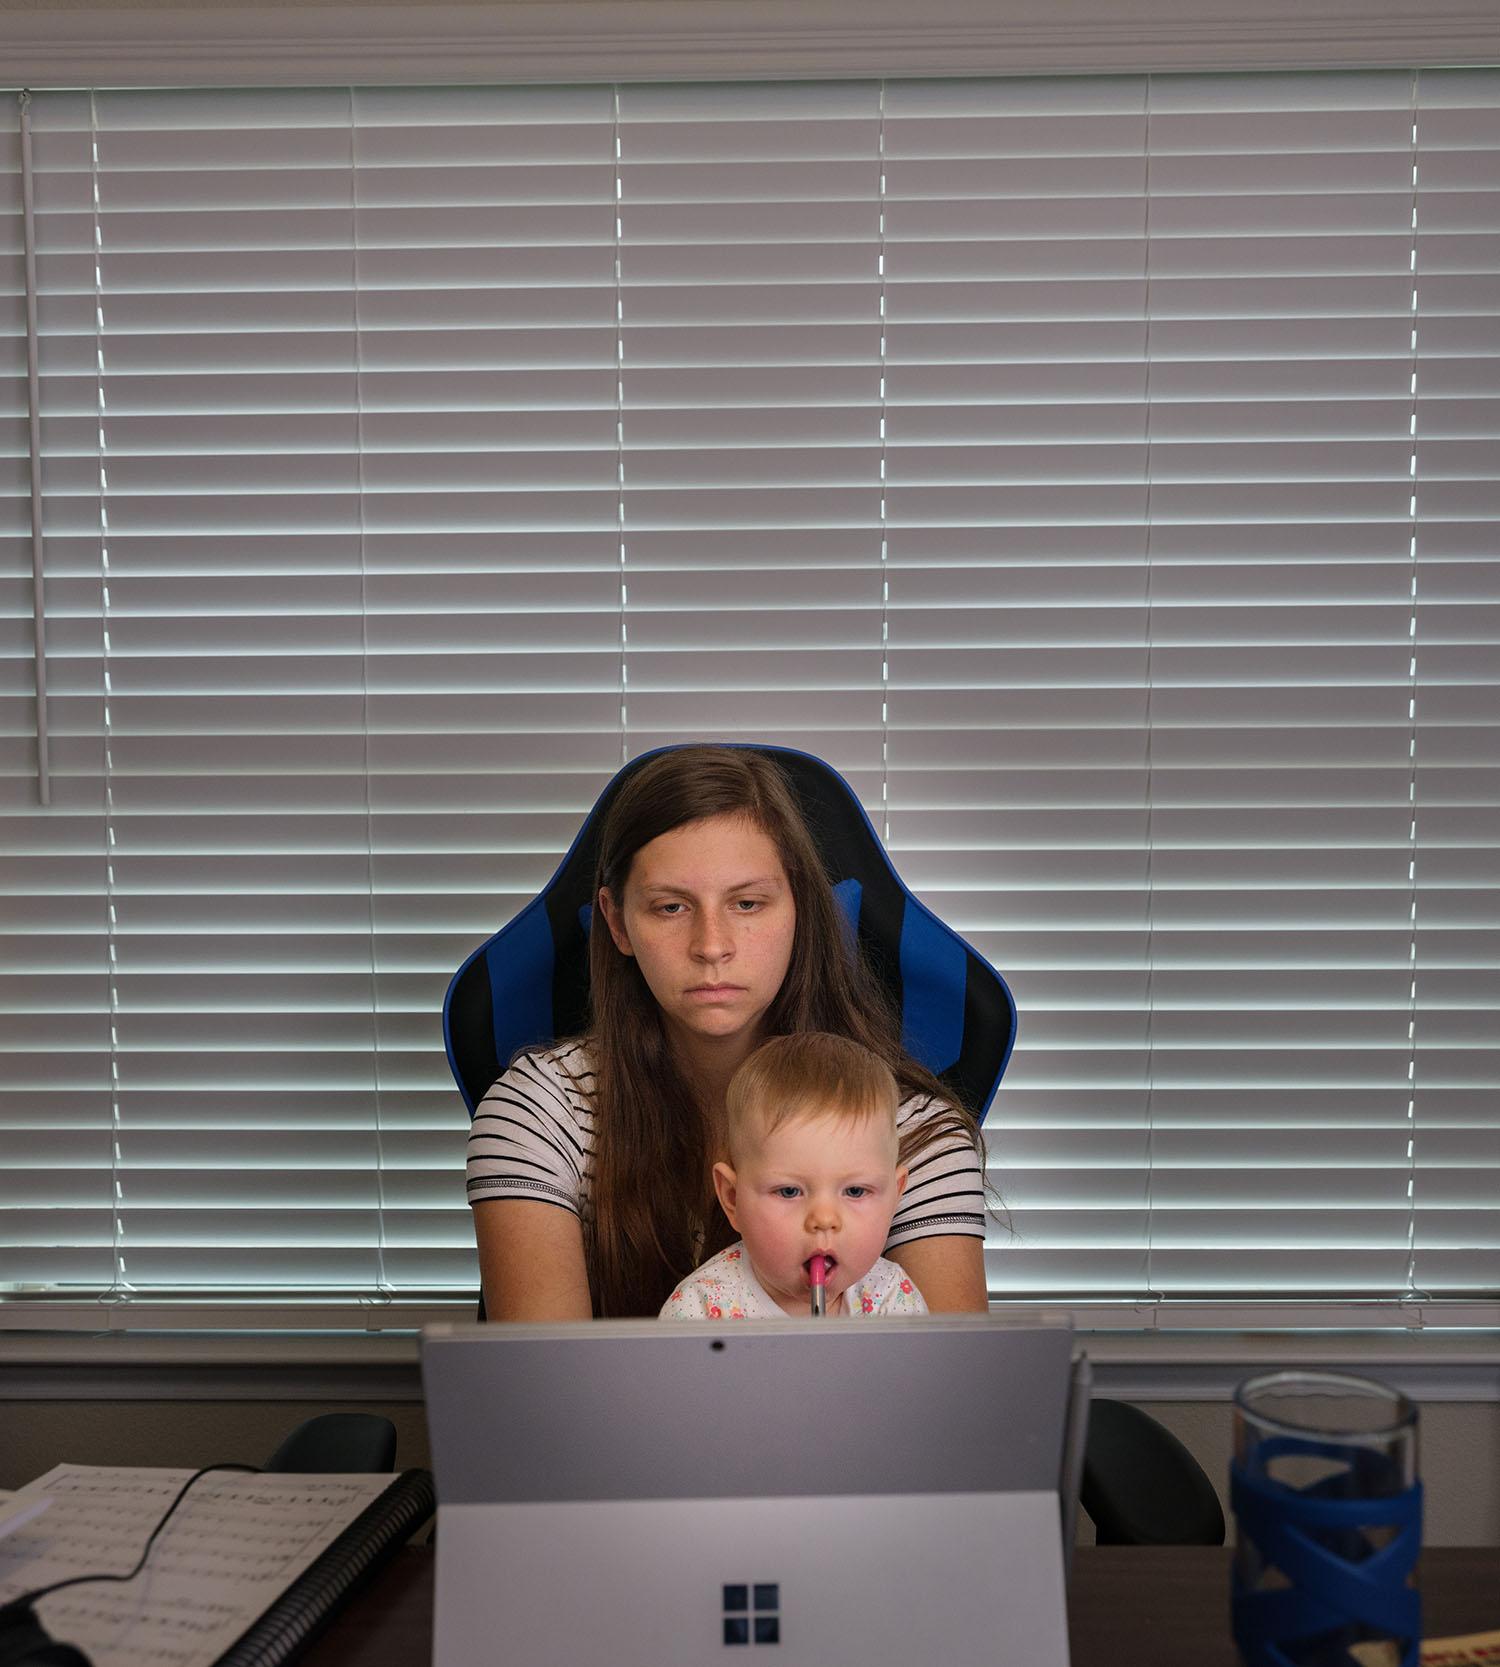 Heather sits at her desk, attending a class on her laptop. Her daughter sits on her lap, with a lollipop in her mouth.